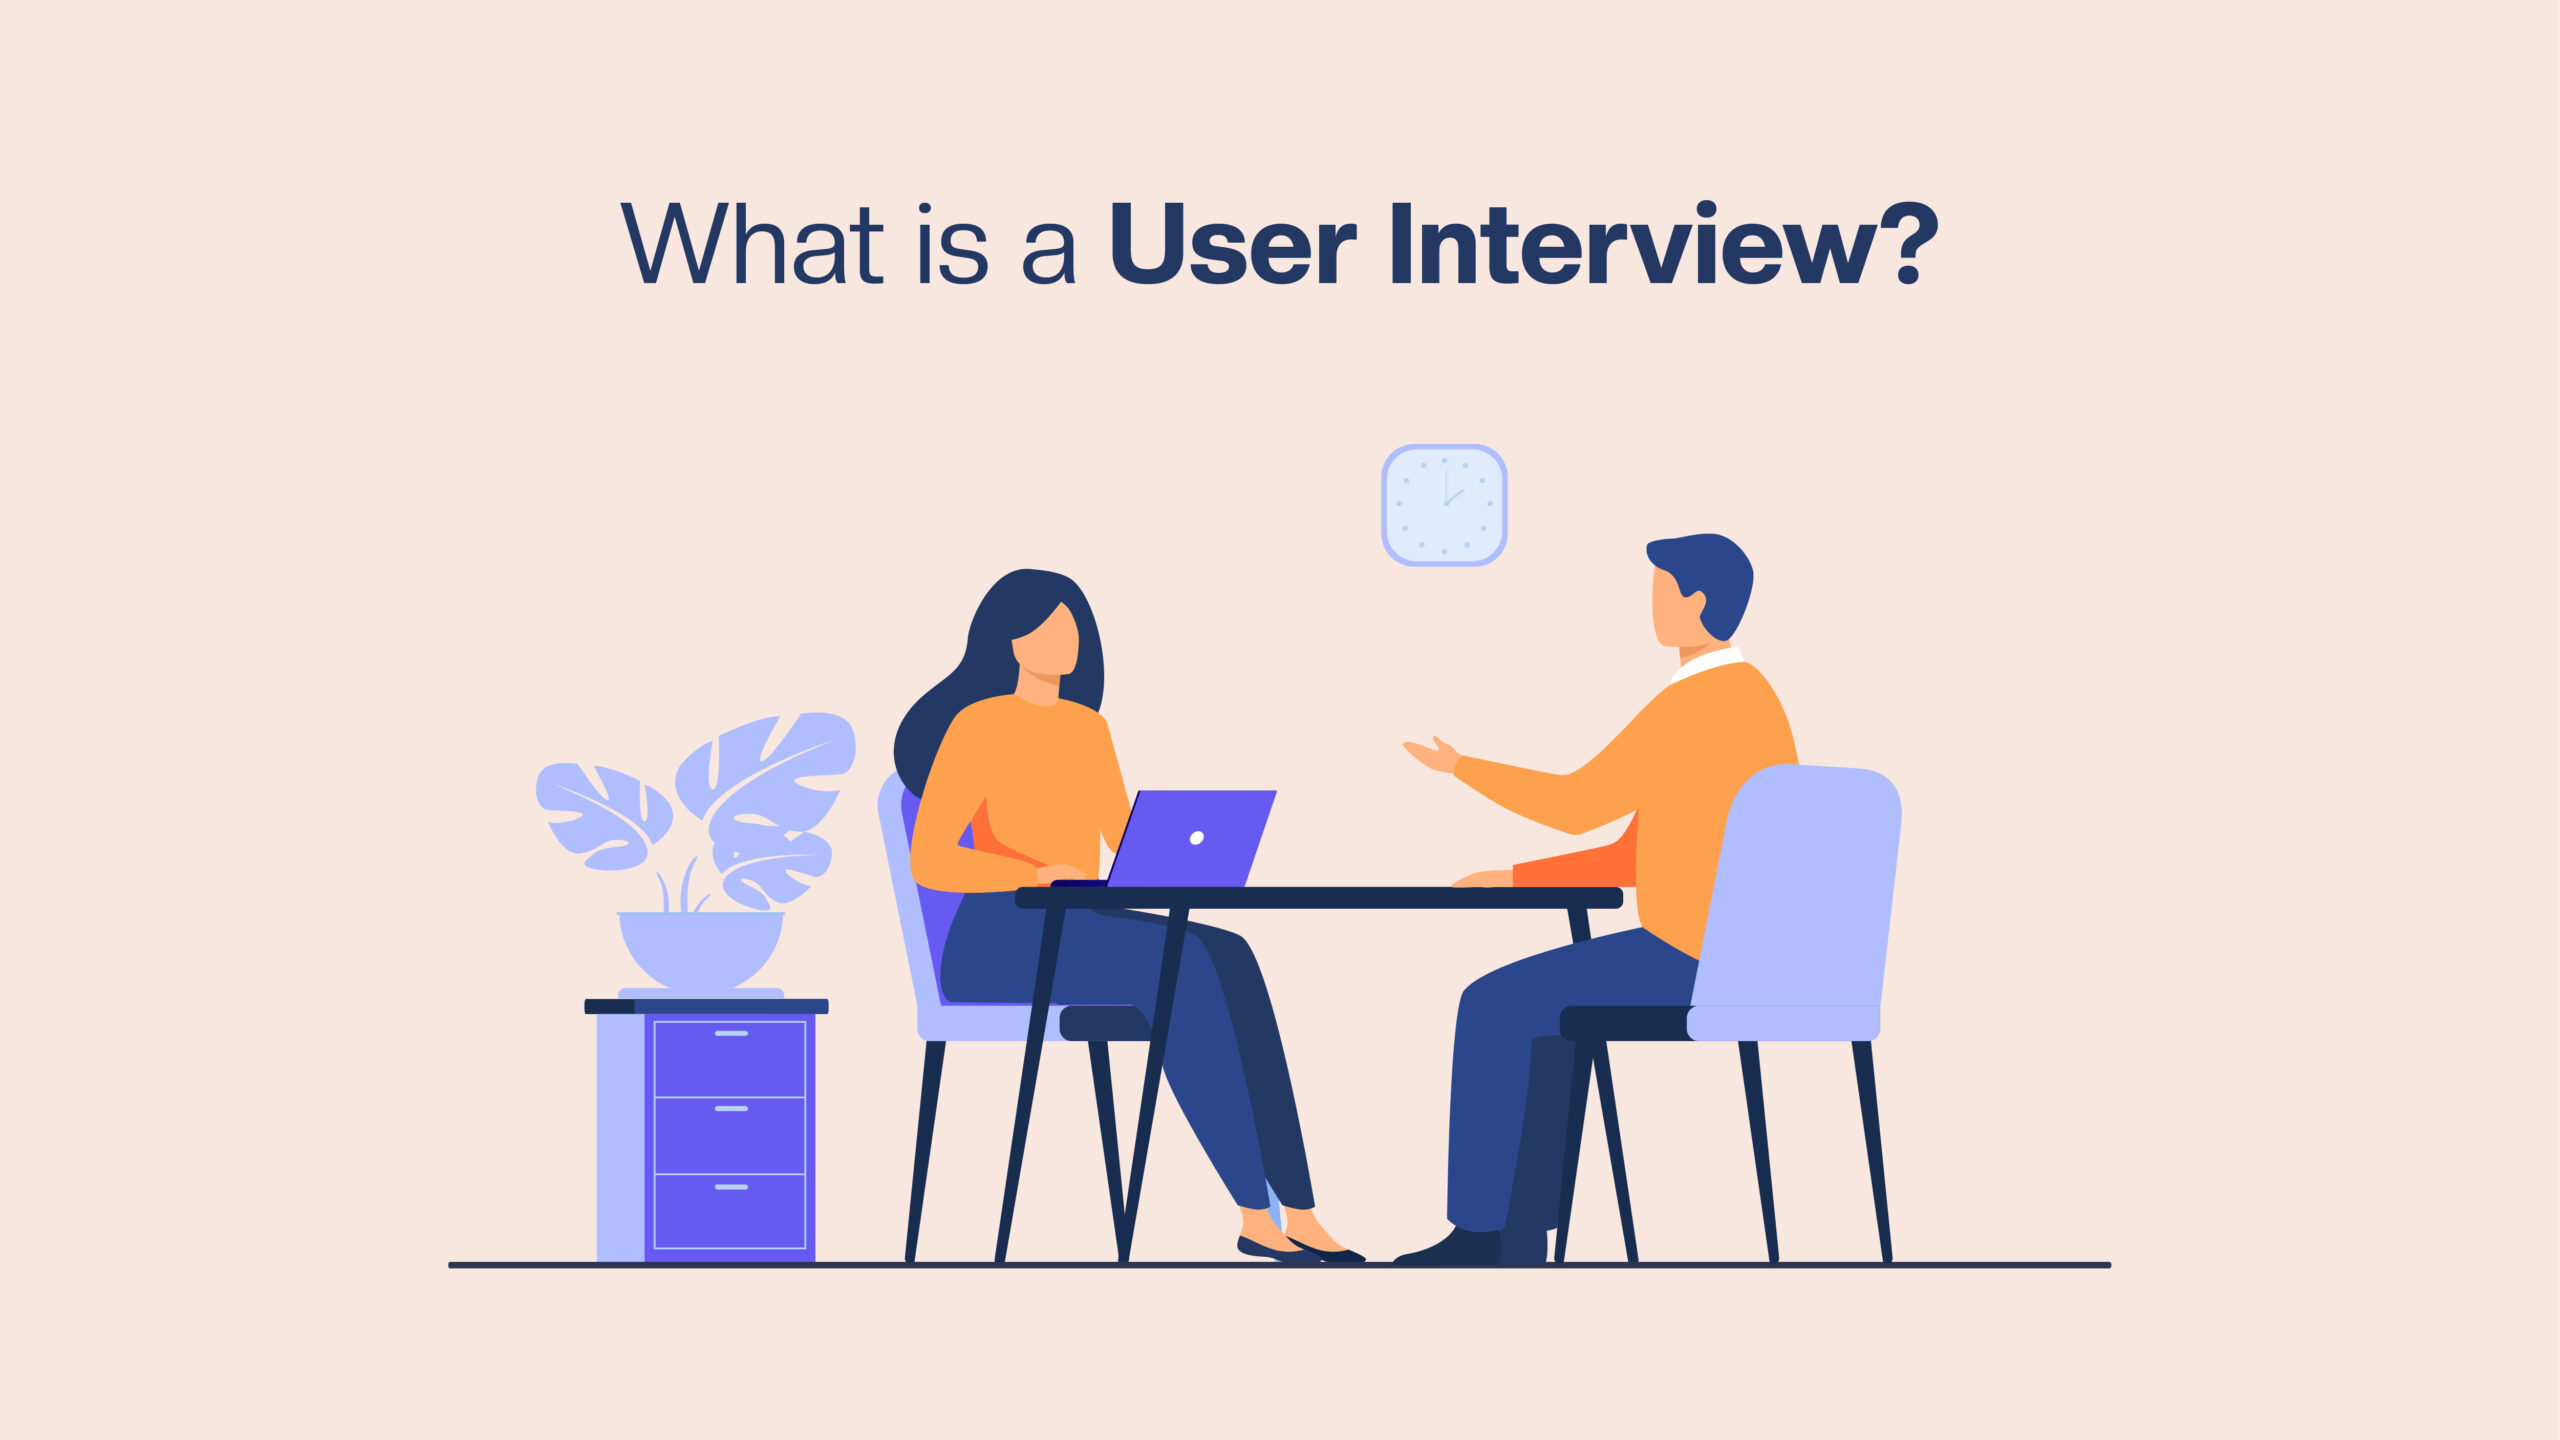 What is an User Interview?